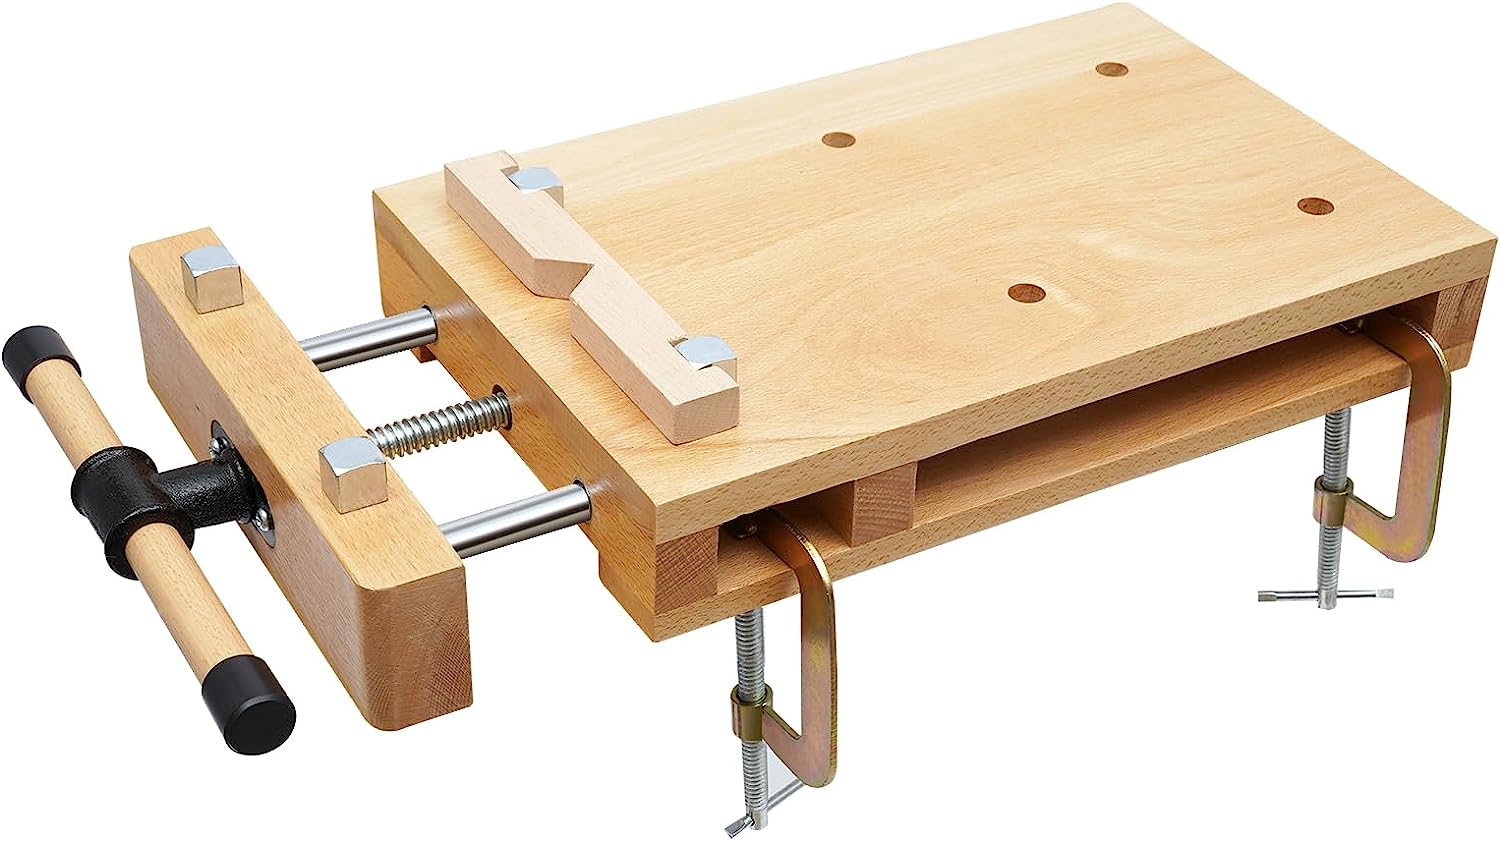 Fetcoi Woodworking Vise for Workbench, Hard Wood [...]